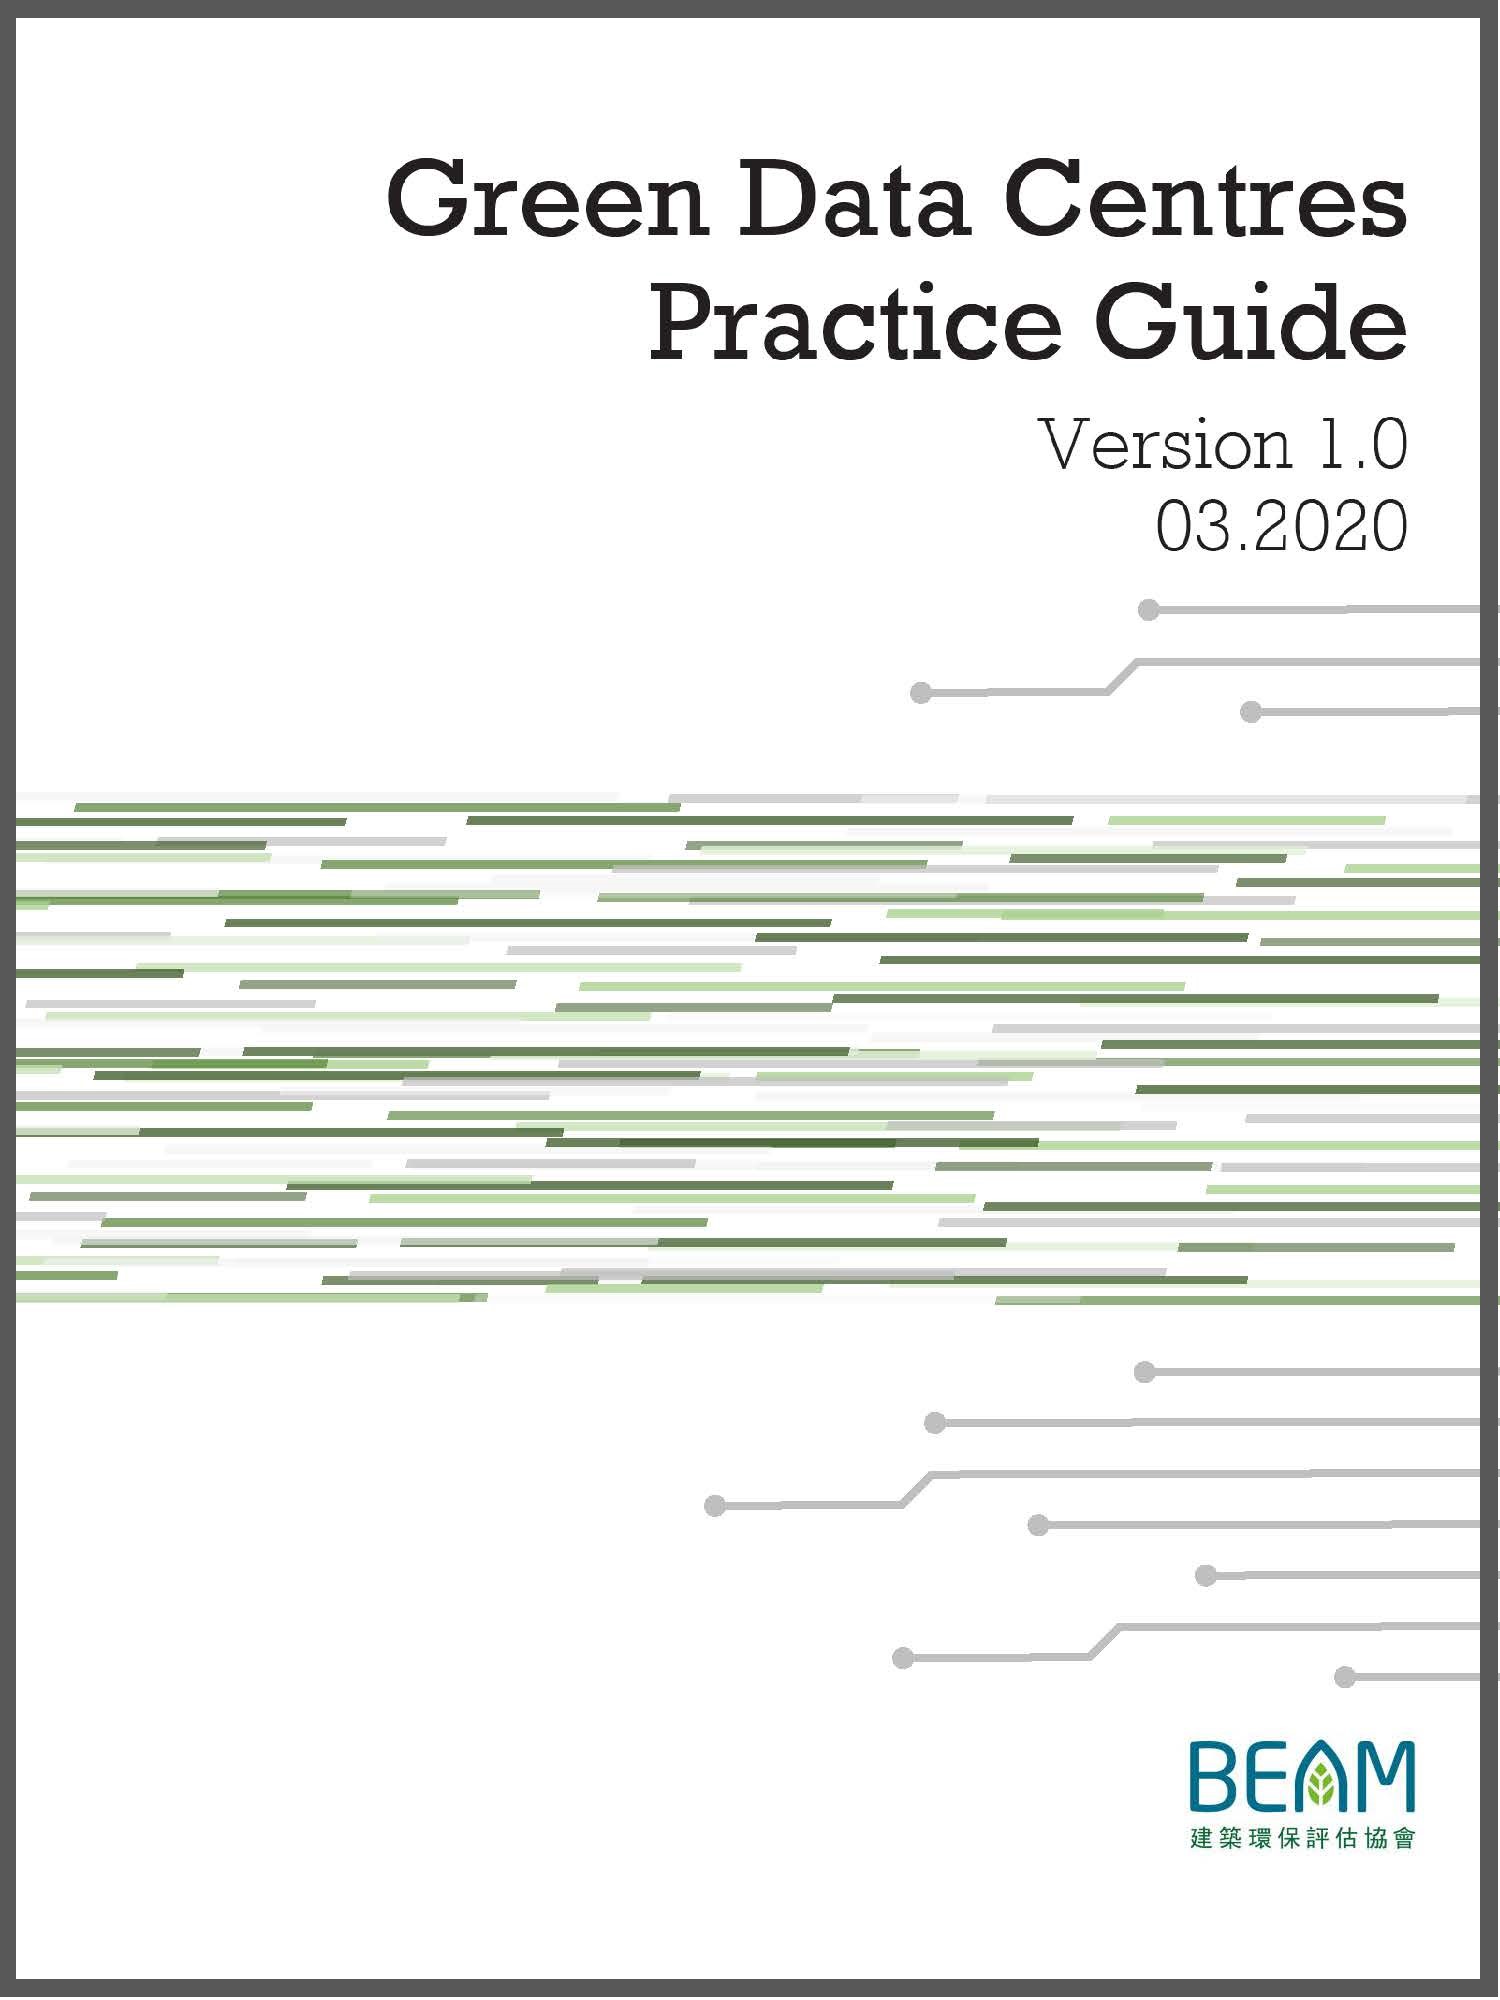 Green Data Centres Practice Guide